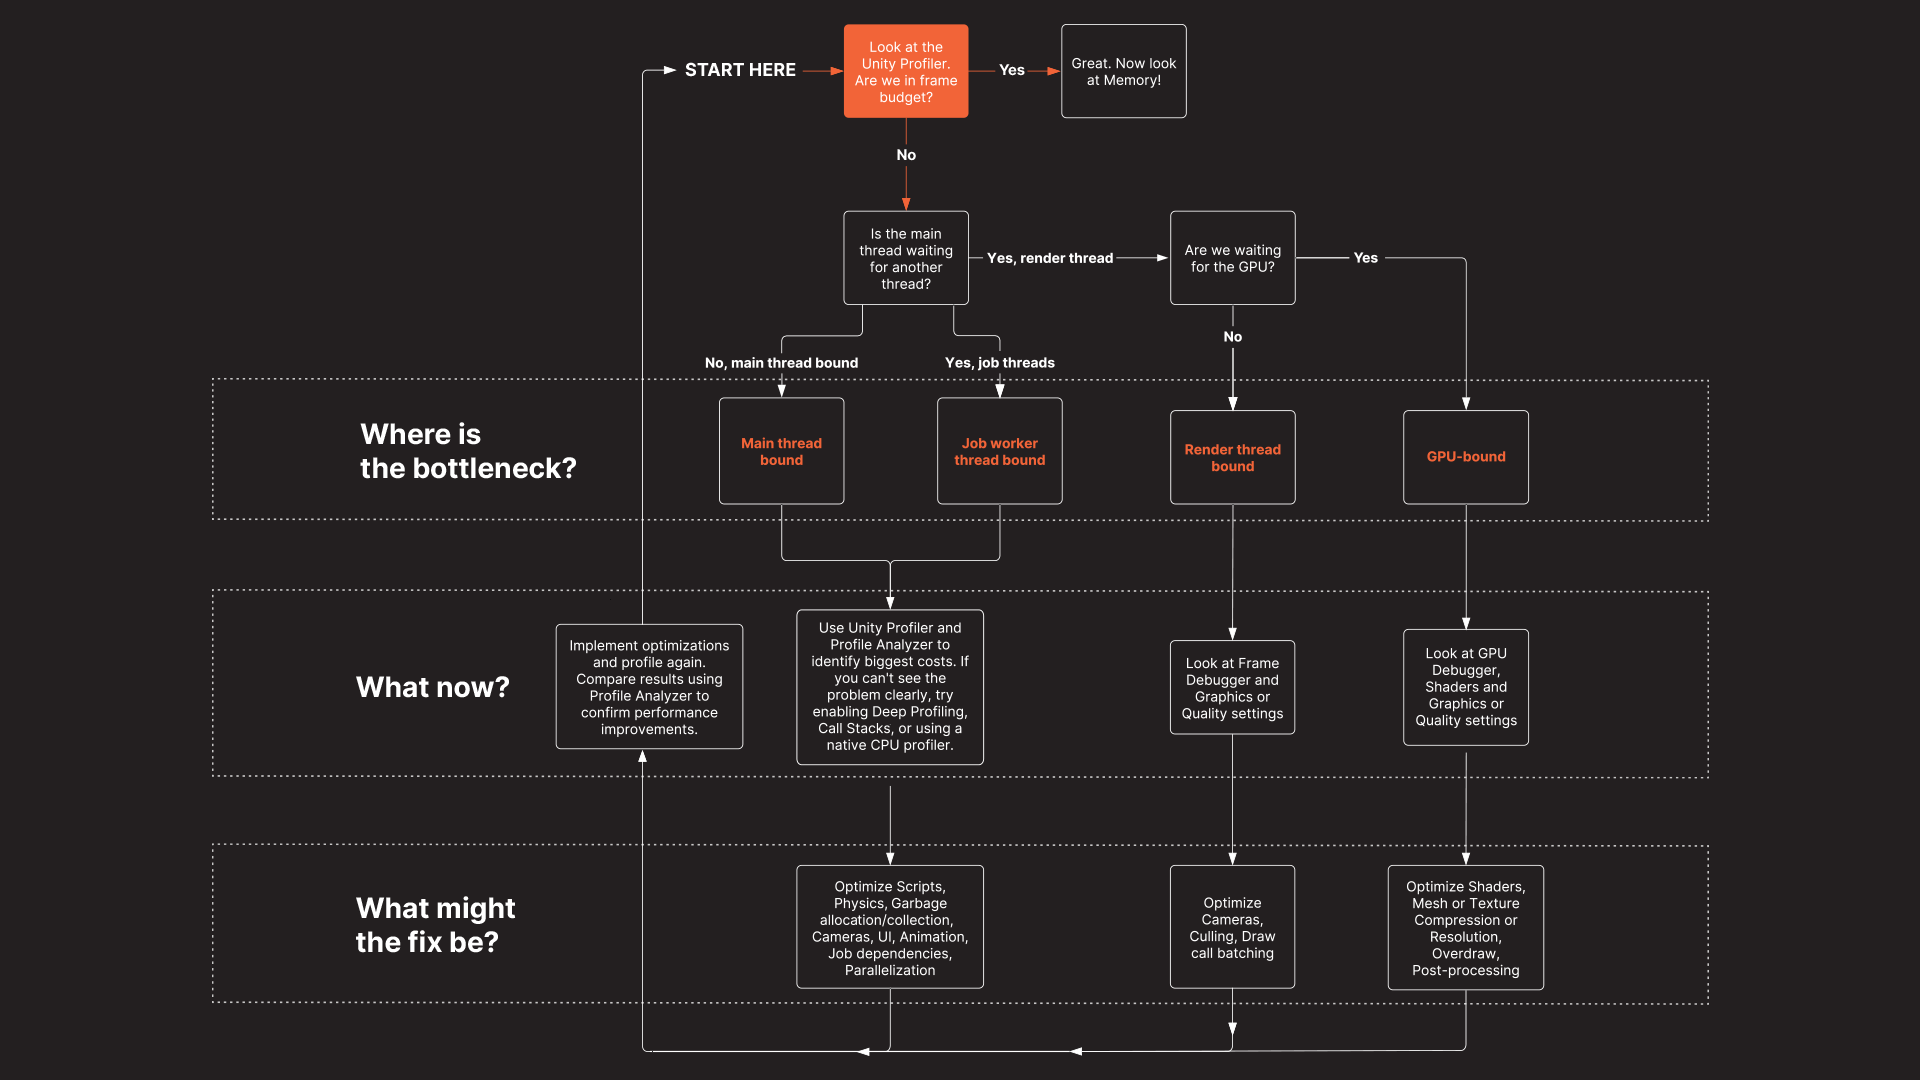 Flowchart that provides a recommended approach to identifying bottlenecks in your project.